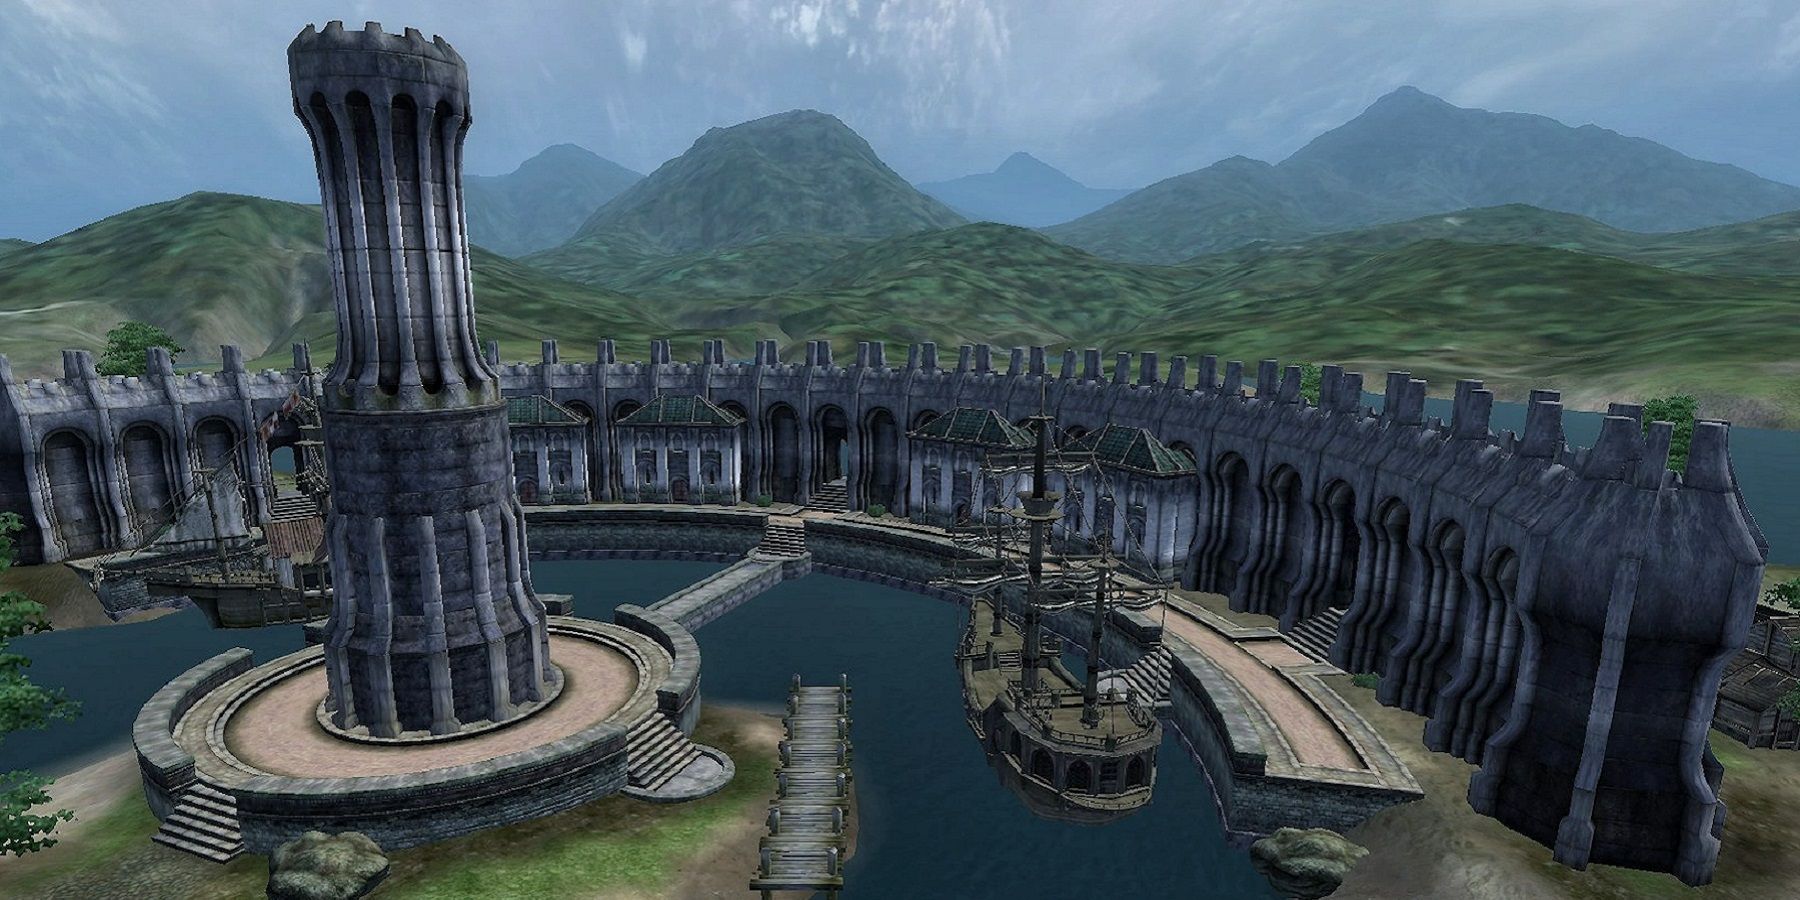 Image from Elder Scrolls 4: Oblivion showing the Waterfront of Imperial City.